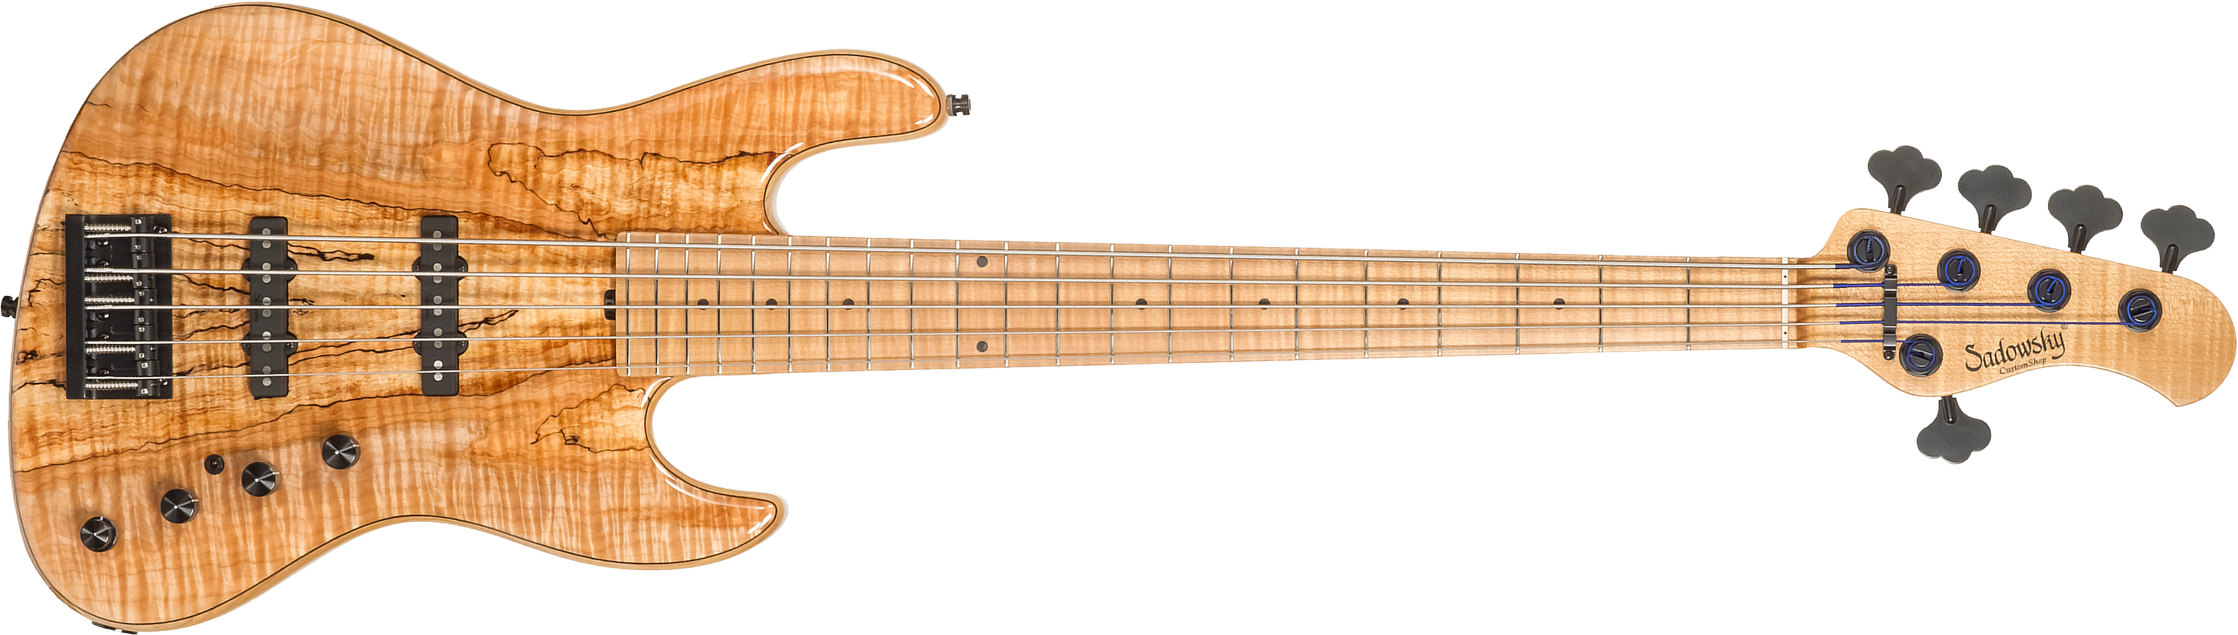 Sadowsky Custom Shop Standard J/j Bass 21f 5c Spalted Maple 5c Active Mn #scsc000188-23 - Natural - Solidbody E-bass - Main picture